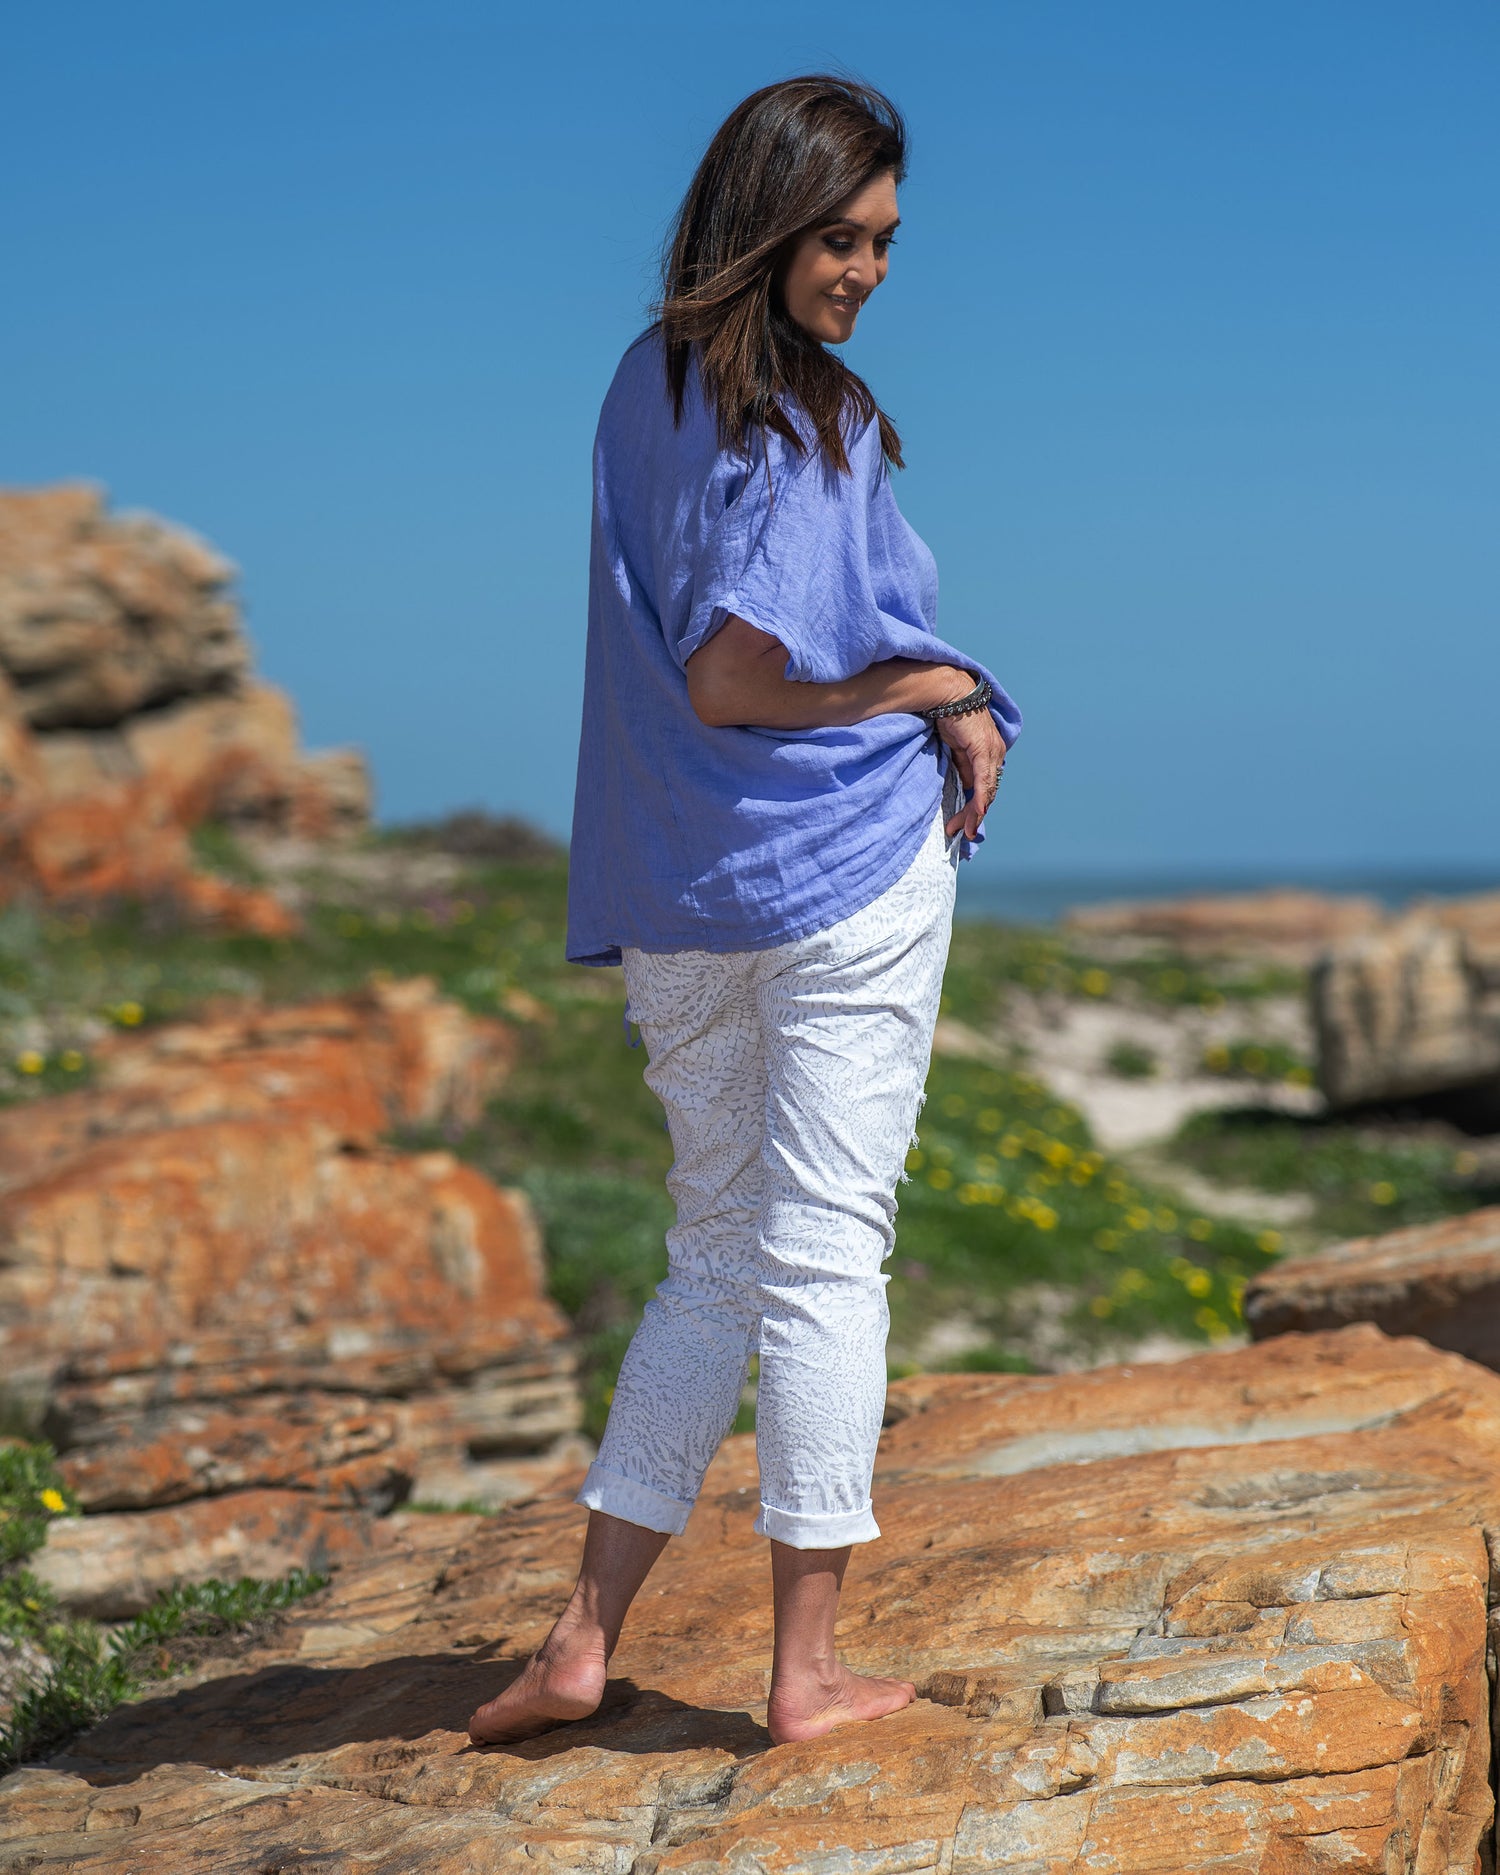 Step into the world of casual chic with this very comfortable, yet stylish linen top. What sets this top apart is its playful frill detailing, adding a touch of whimsy and femininity to your look. The natural, breathable linen fabric keeps you cool and fresh even on the warmest days, making it a must-have addition to your summer wardrobe